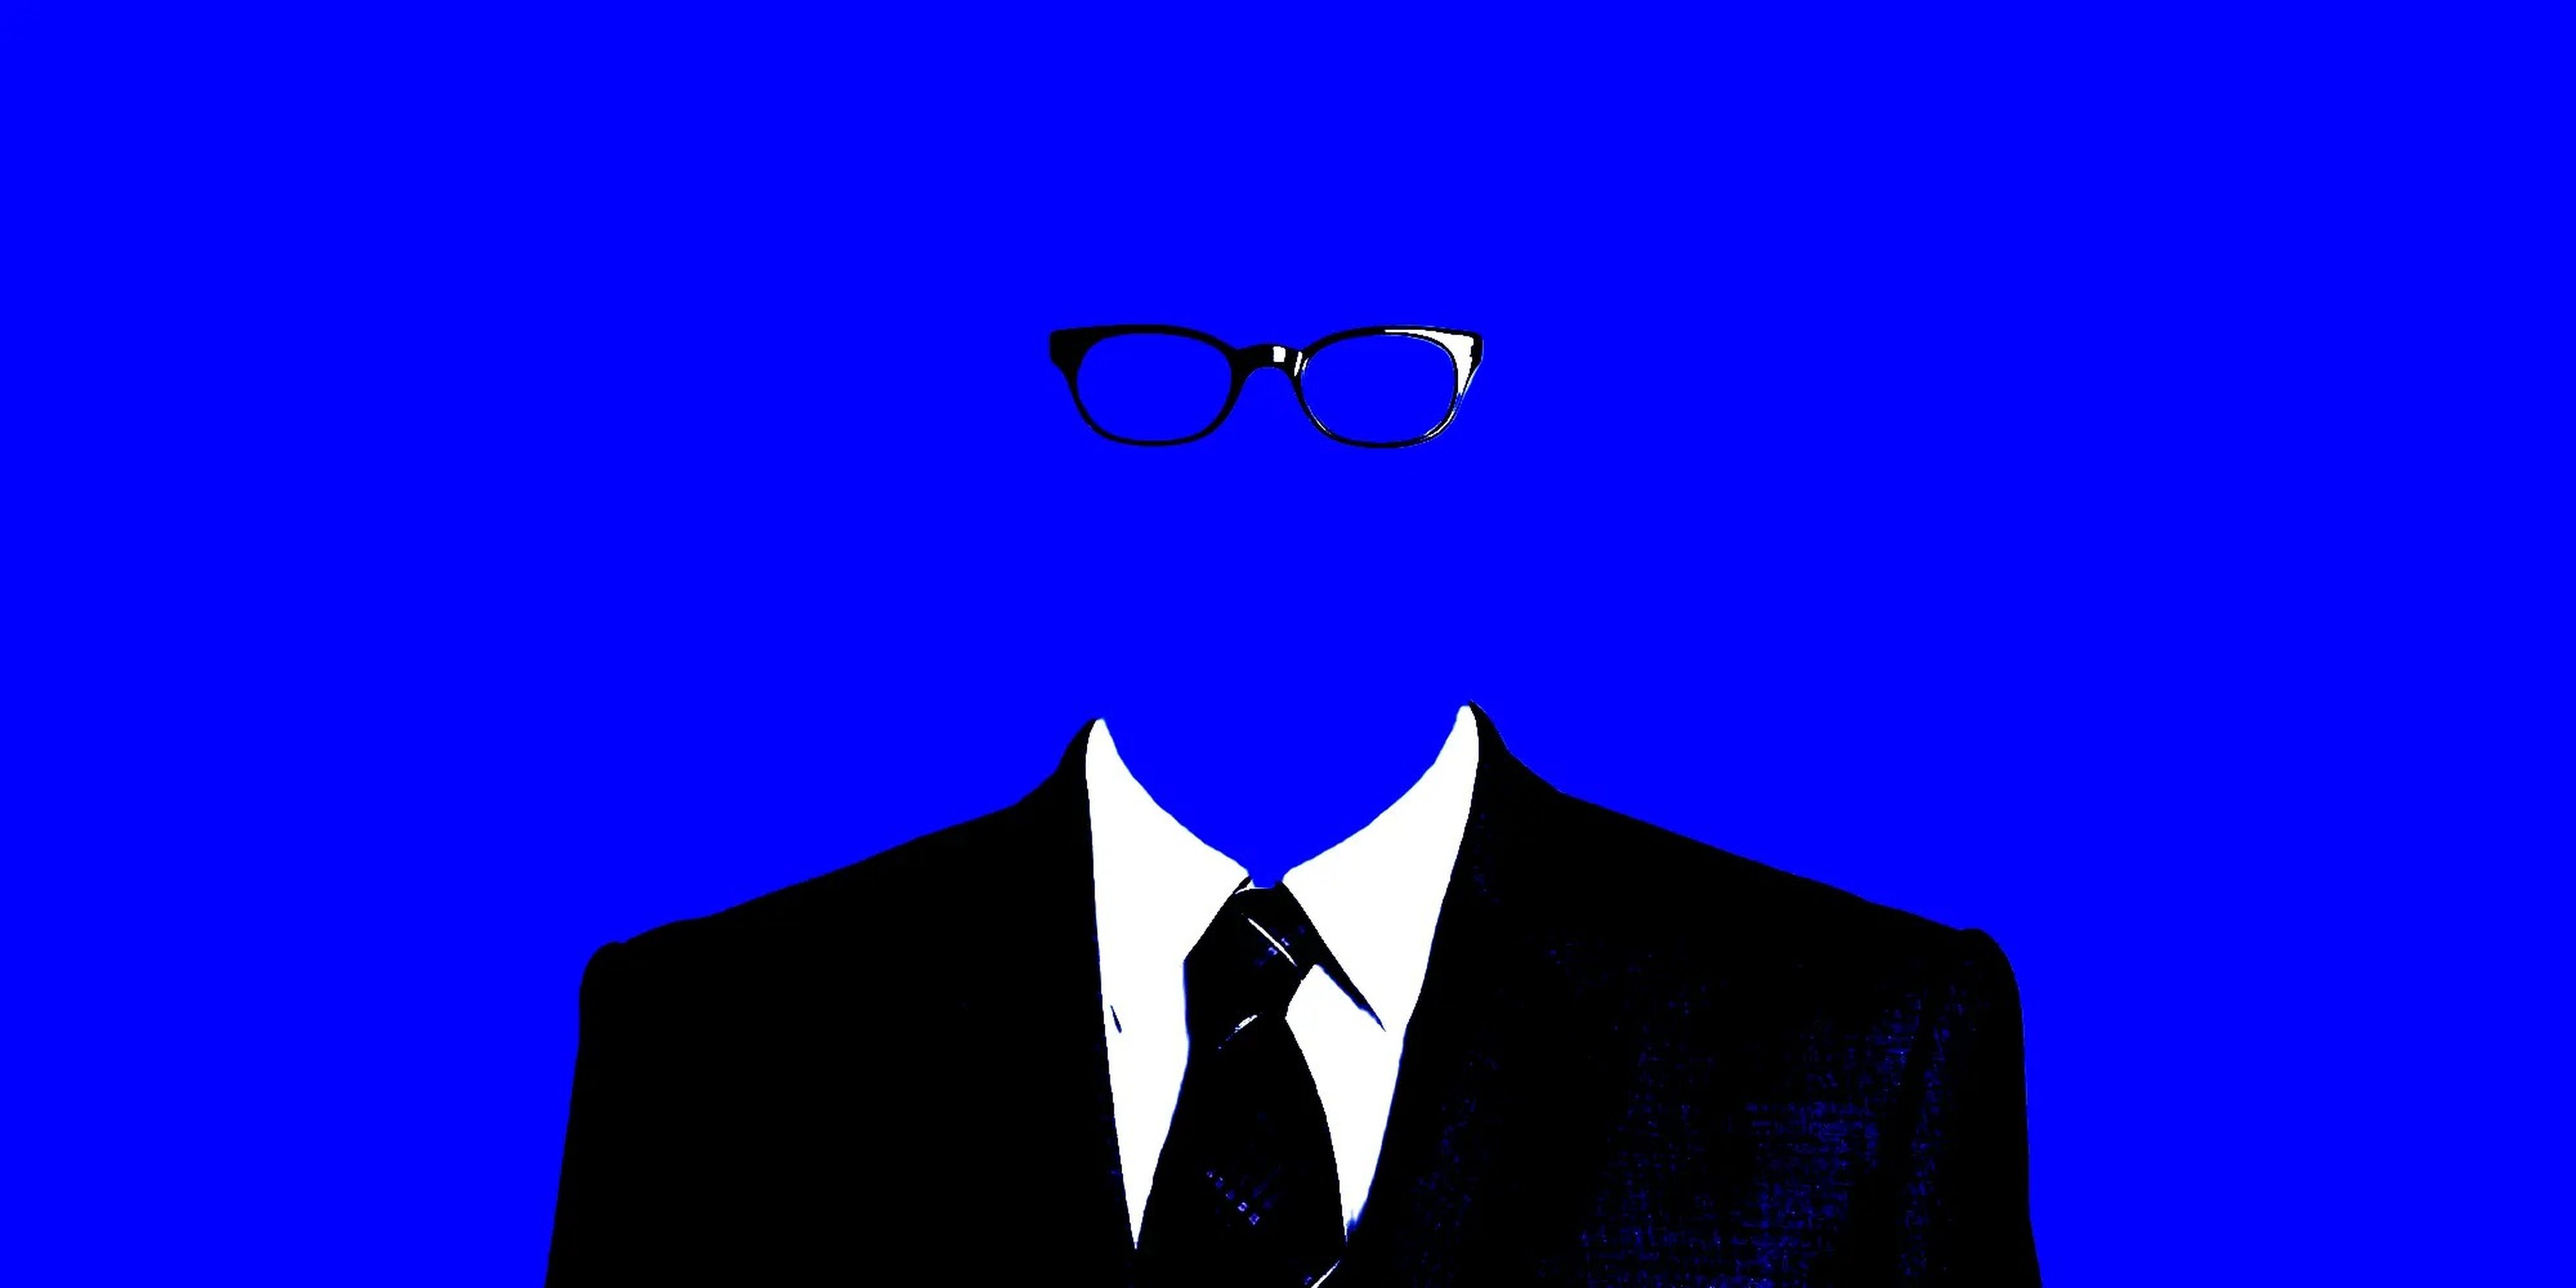 A suit and glasses with no body